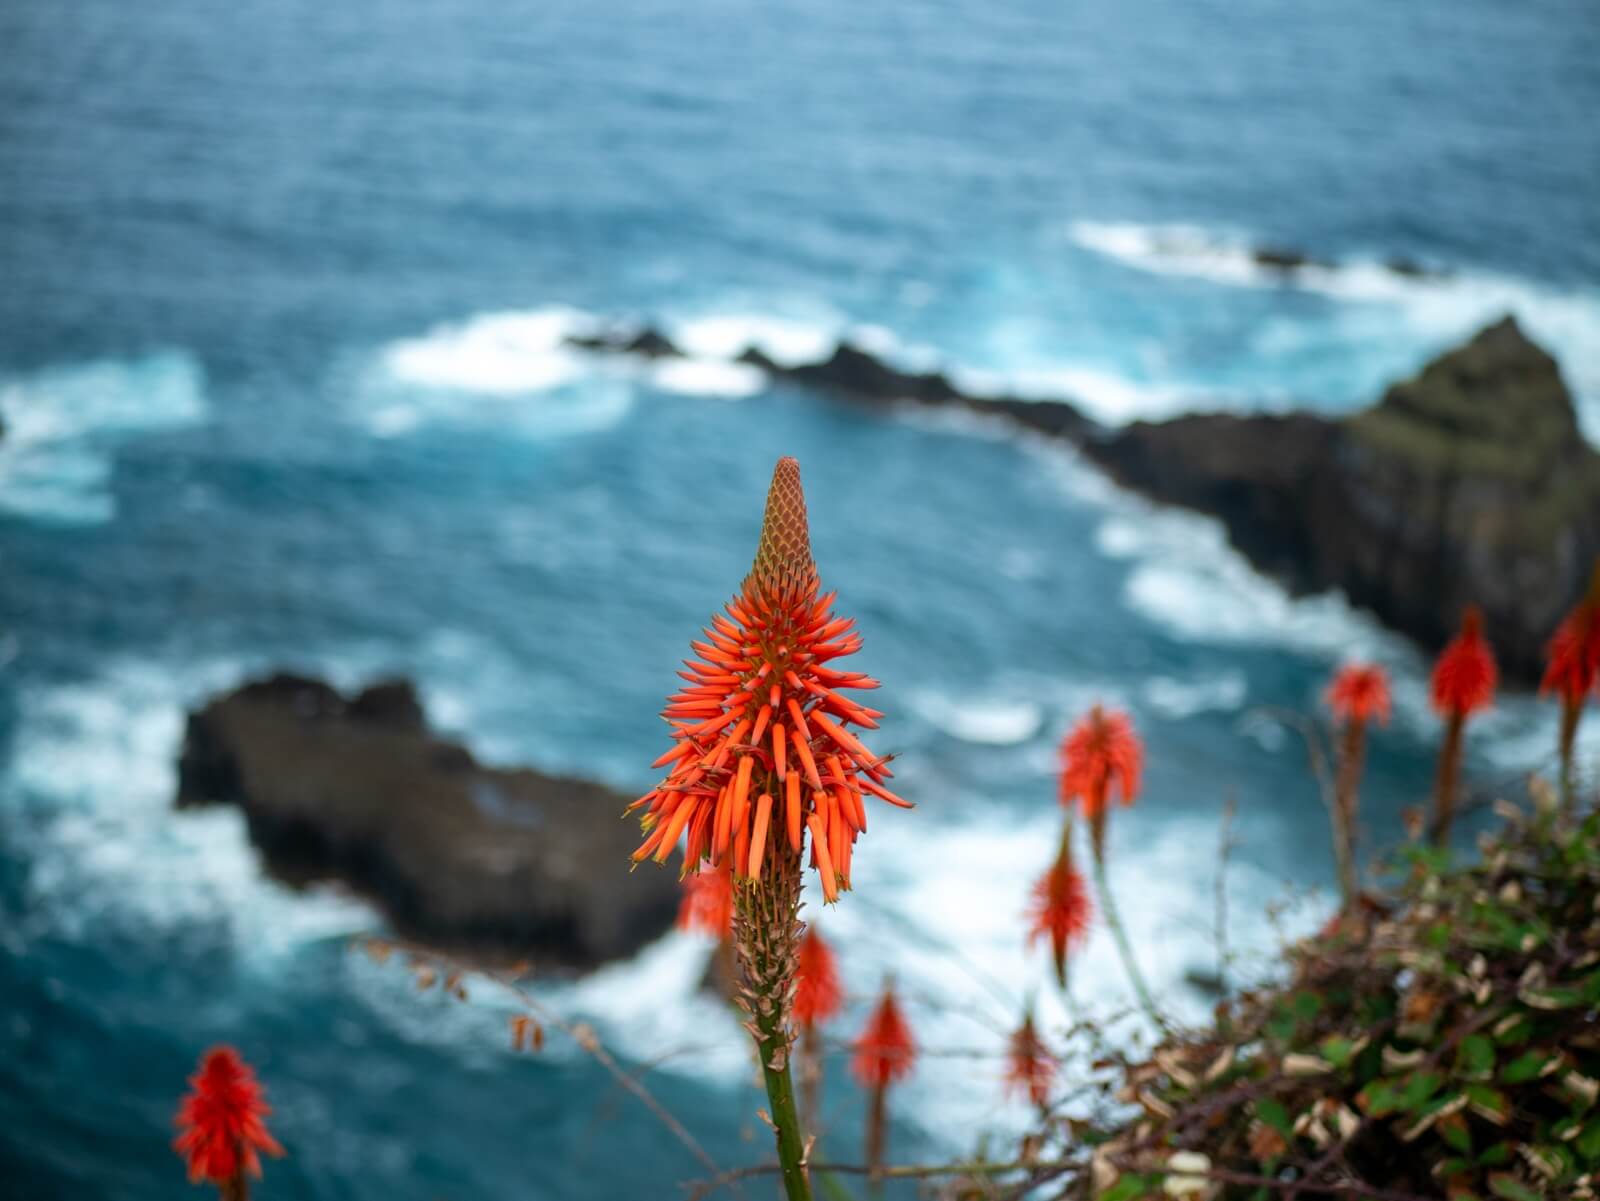 The True Flavours & Natural Beauty of Madeira Islands - Wild Flowers in Madeira